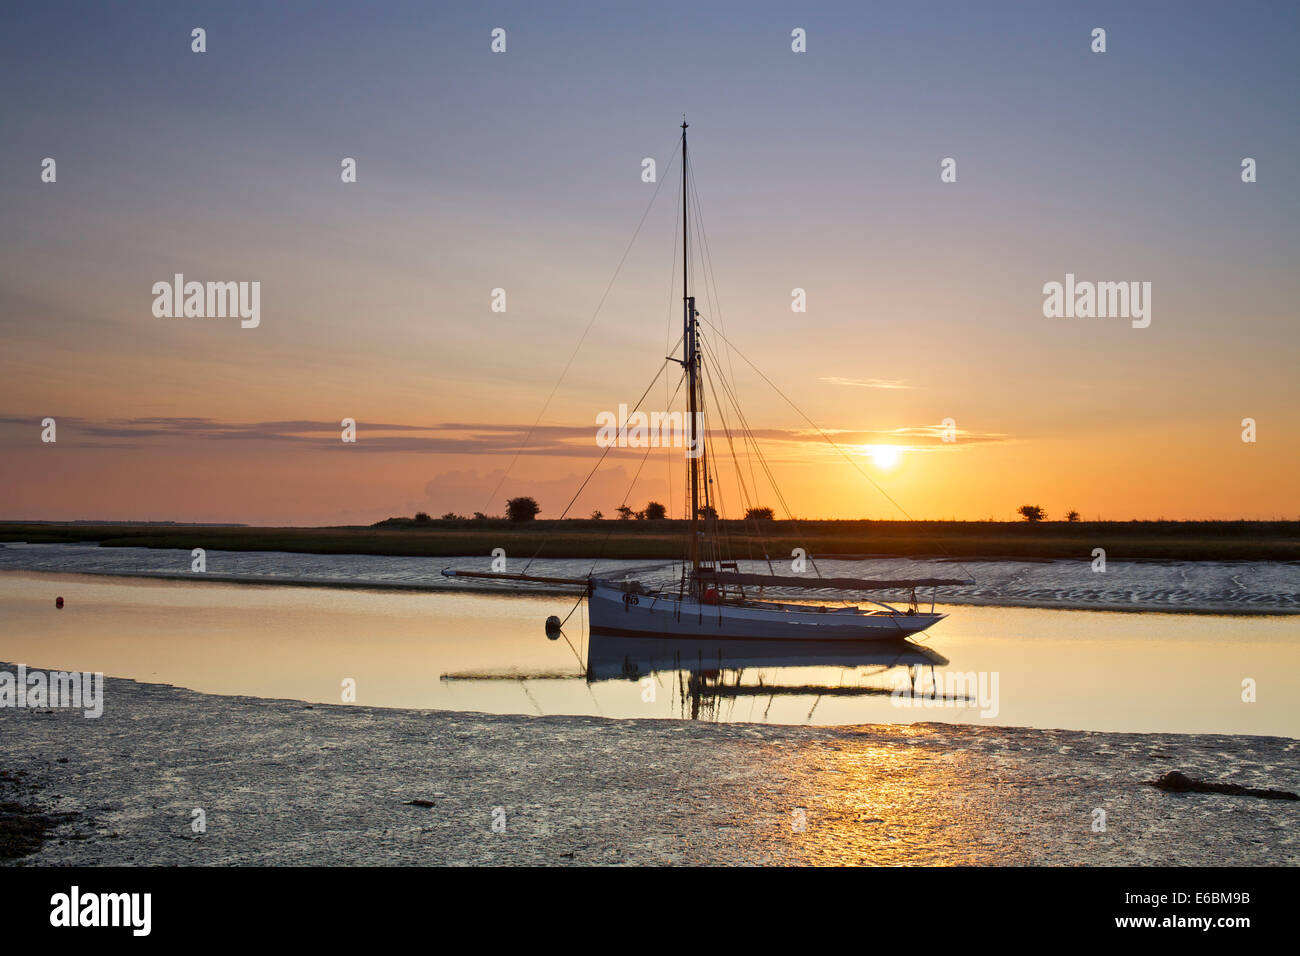 Faversham Creek, Kent, UK 20th August 2014. Sunrise at Faversham Creek lights up one of the last remaining seaworthy Whitstable Oyster Smacks, F76 Gamecock, the Yawl is over 100 years old having been launched in 1907. Cooler days and nights are forecast as the weather starts to turn slowly toward autumn. Stock Photo